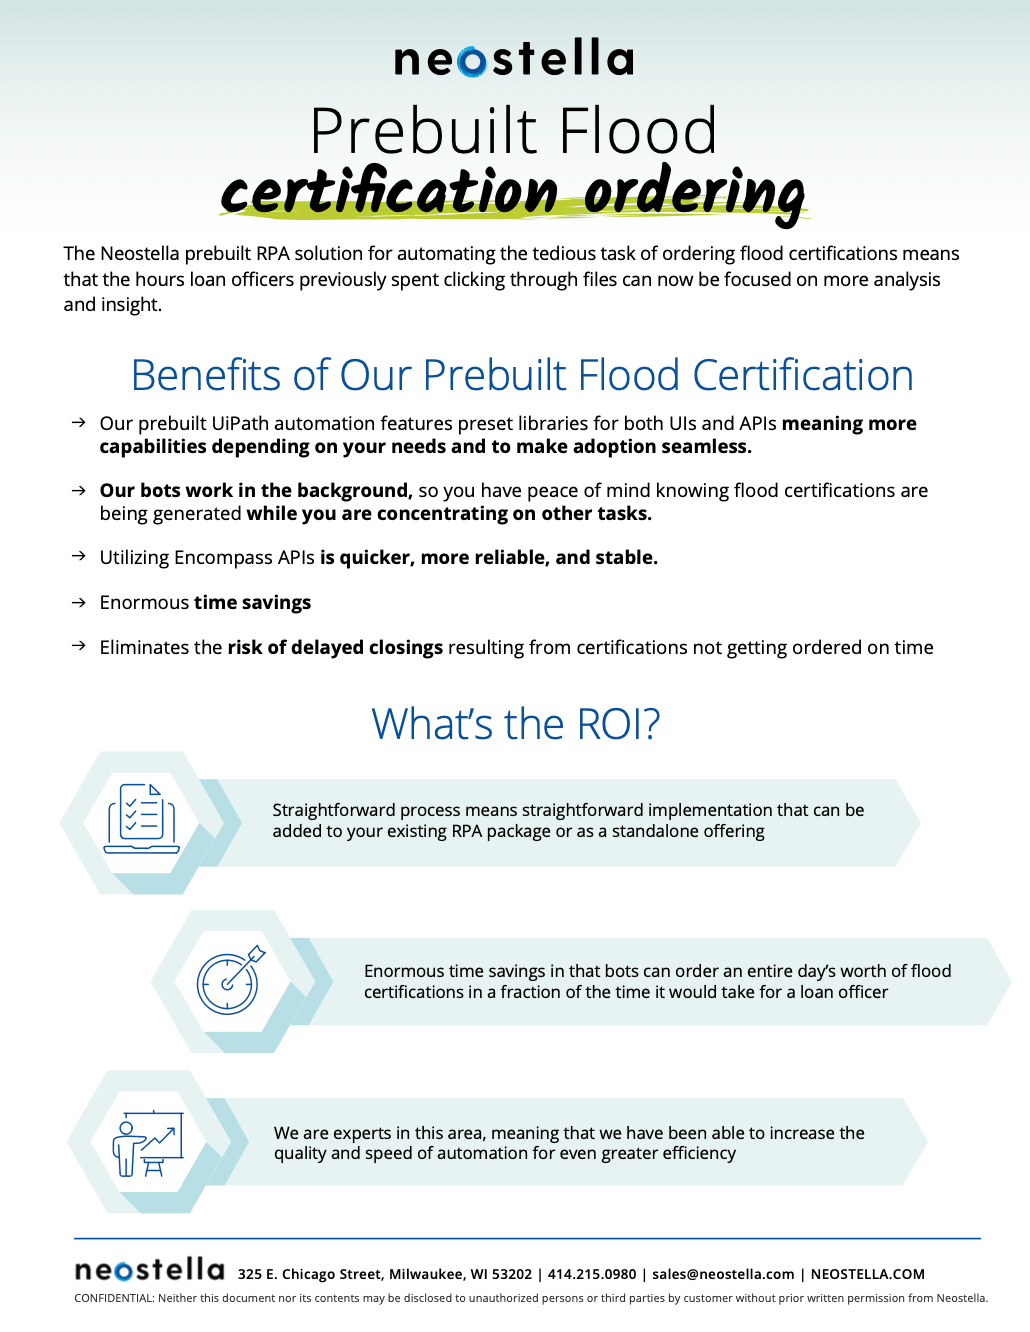 A preview of the download guide for Neostella's prebuilt flood certification ordering automation for mortgage industry professionals